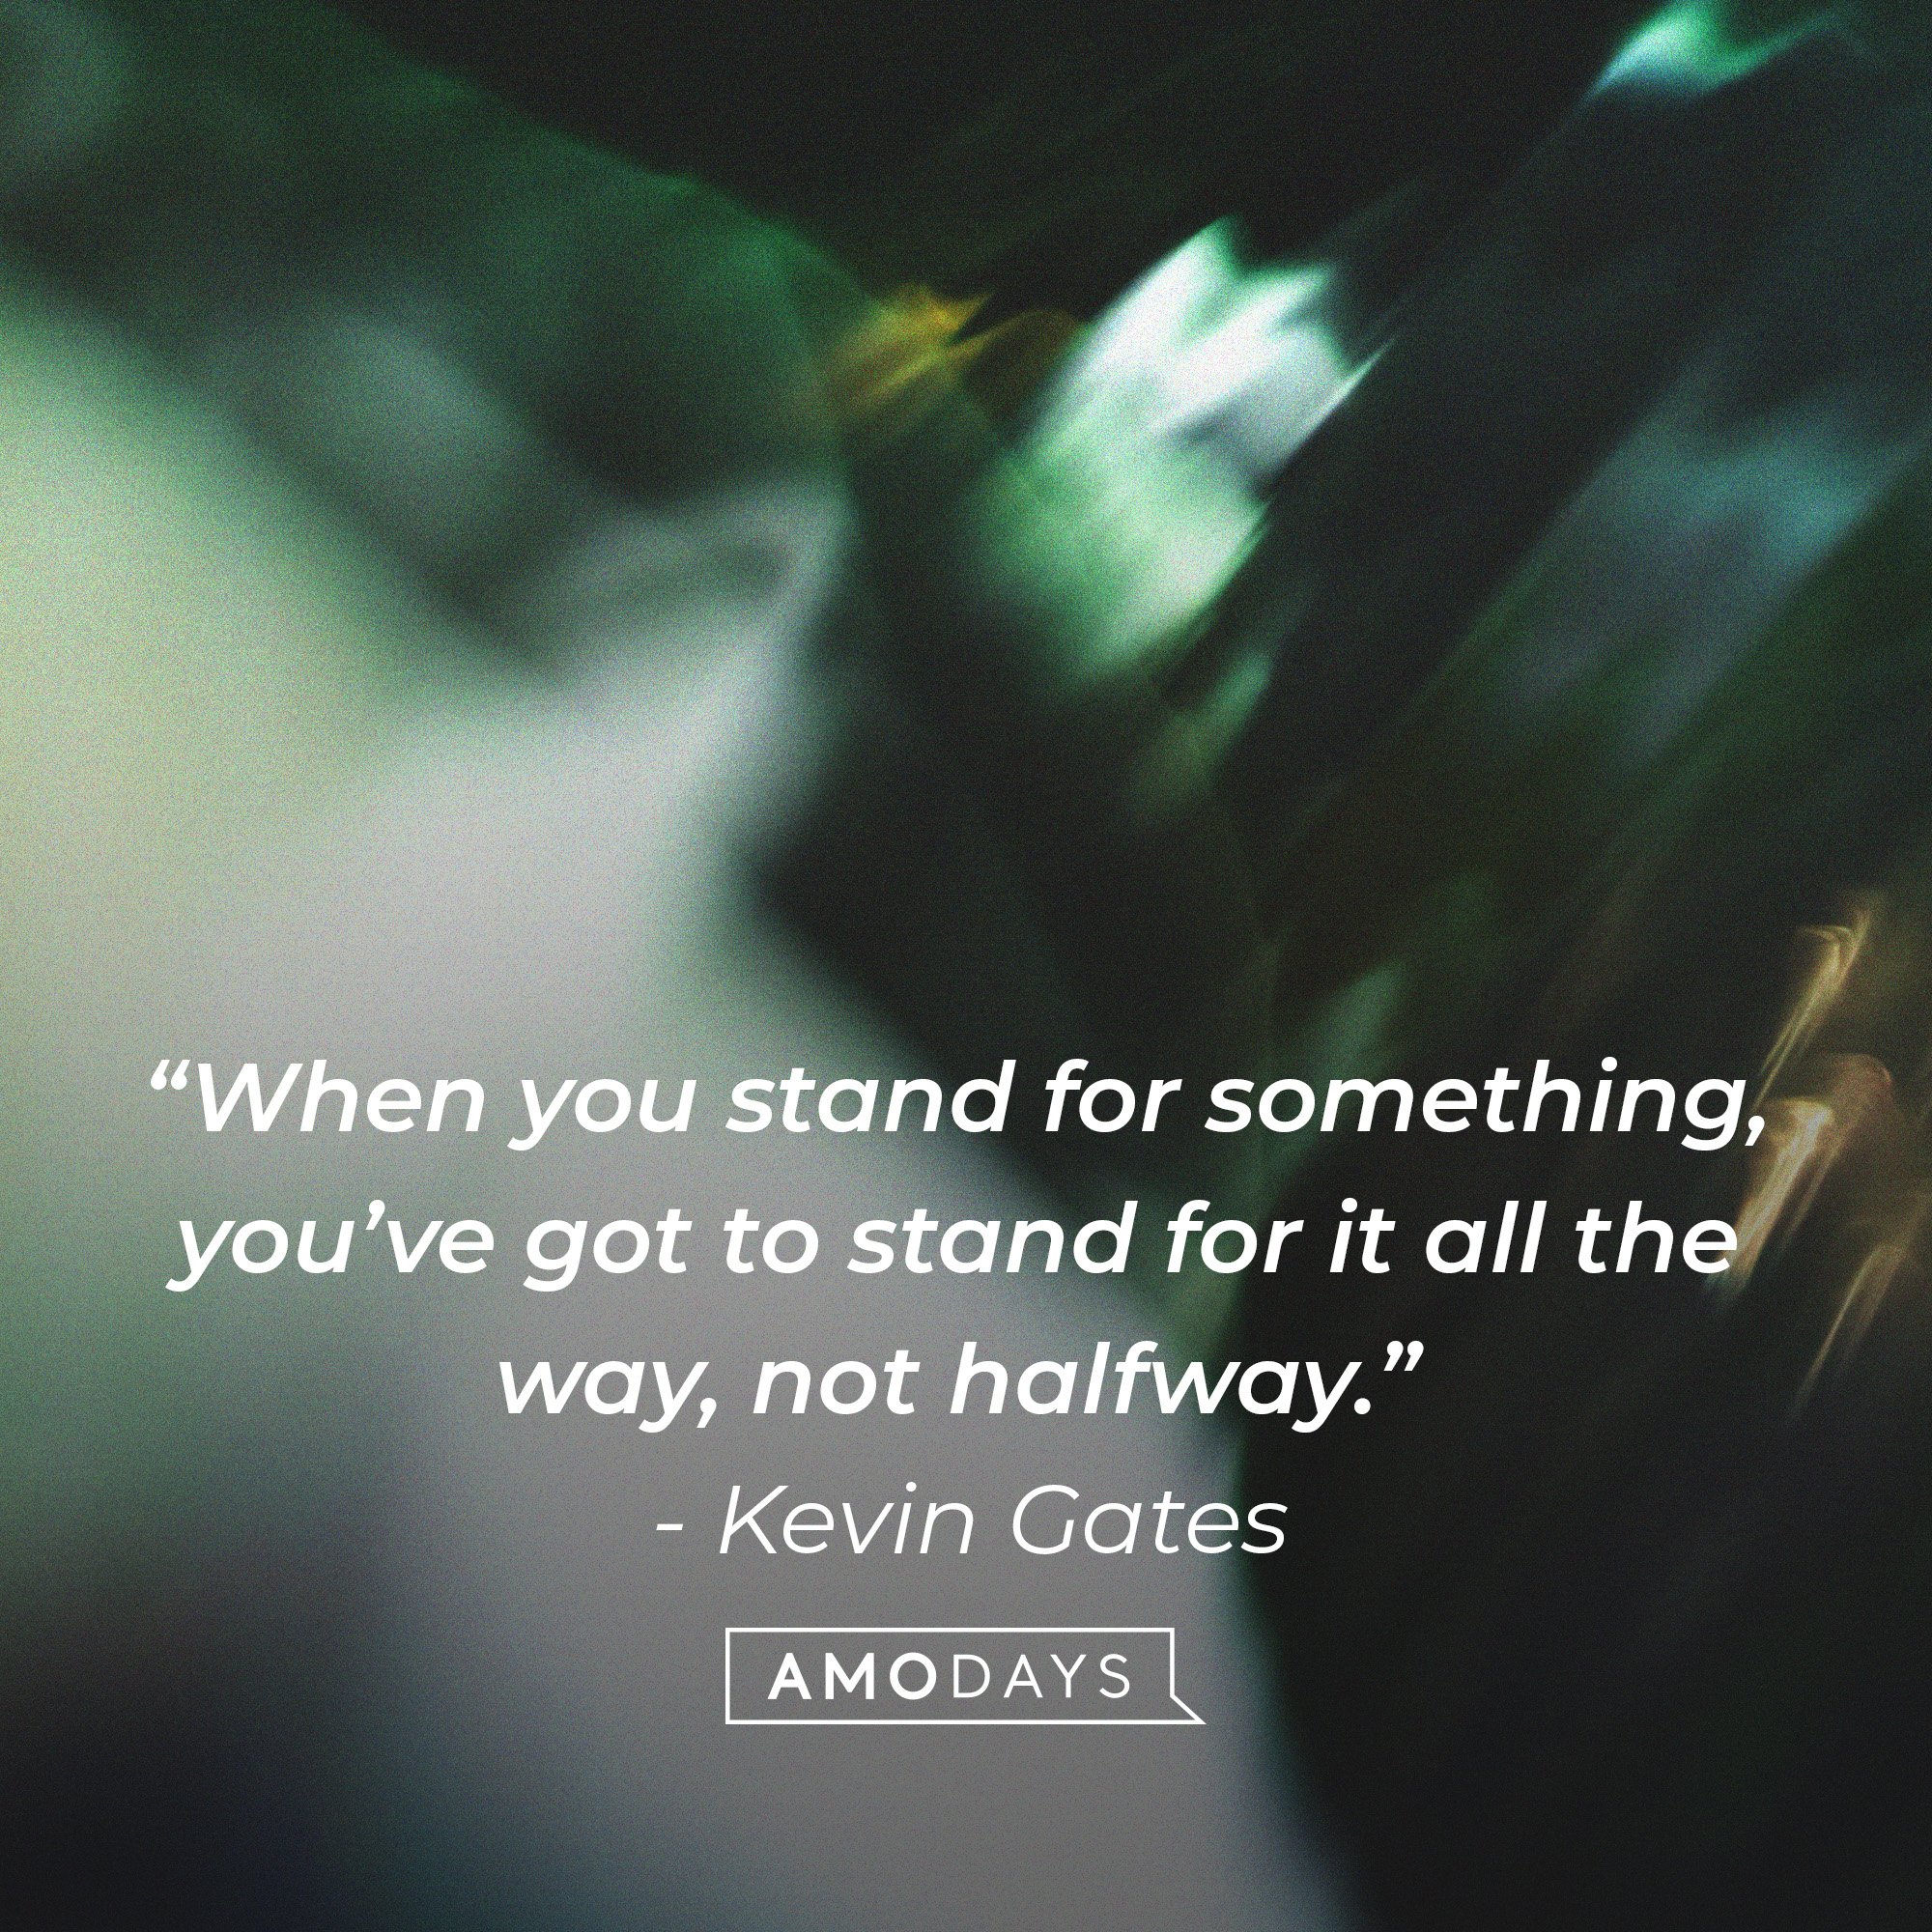 Kevin Gates’ quote: "When you stand for something, you’ve got to stand for it all the way, not halfway.” | Image: AmoDays